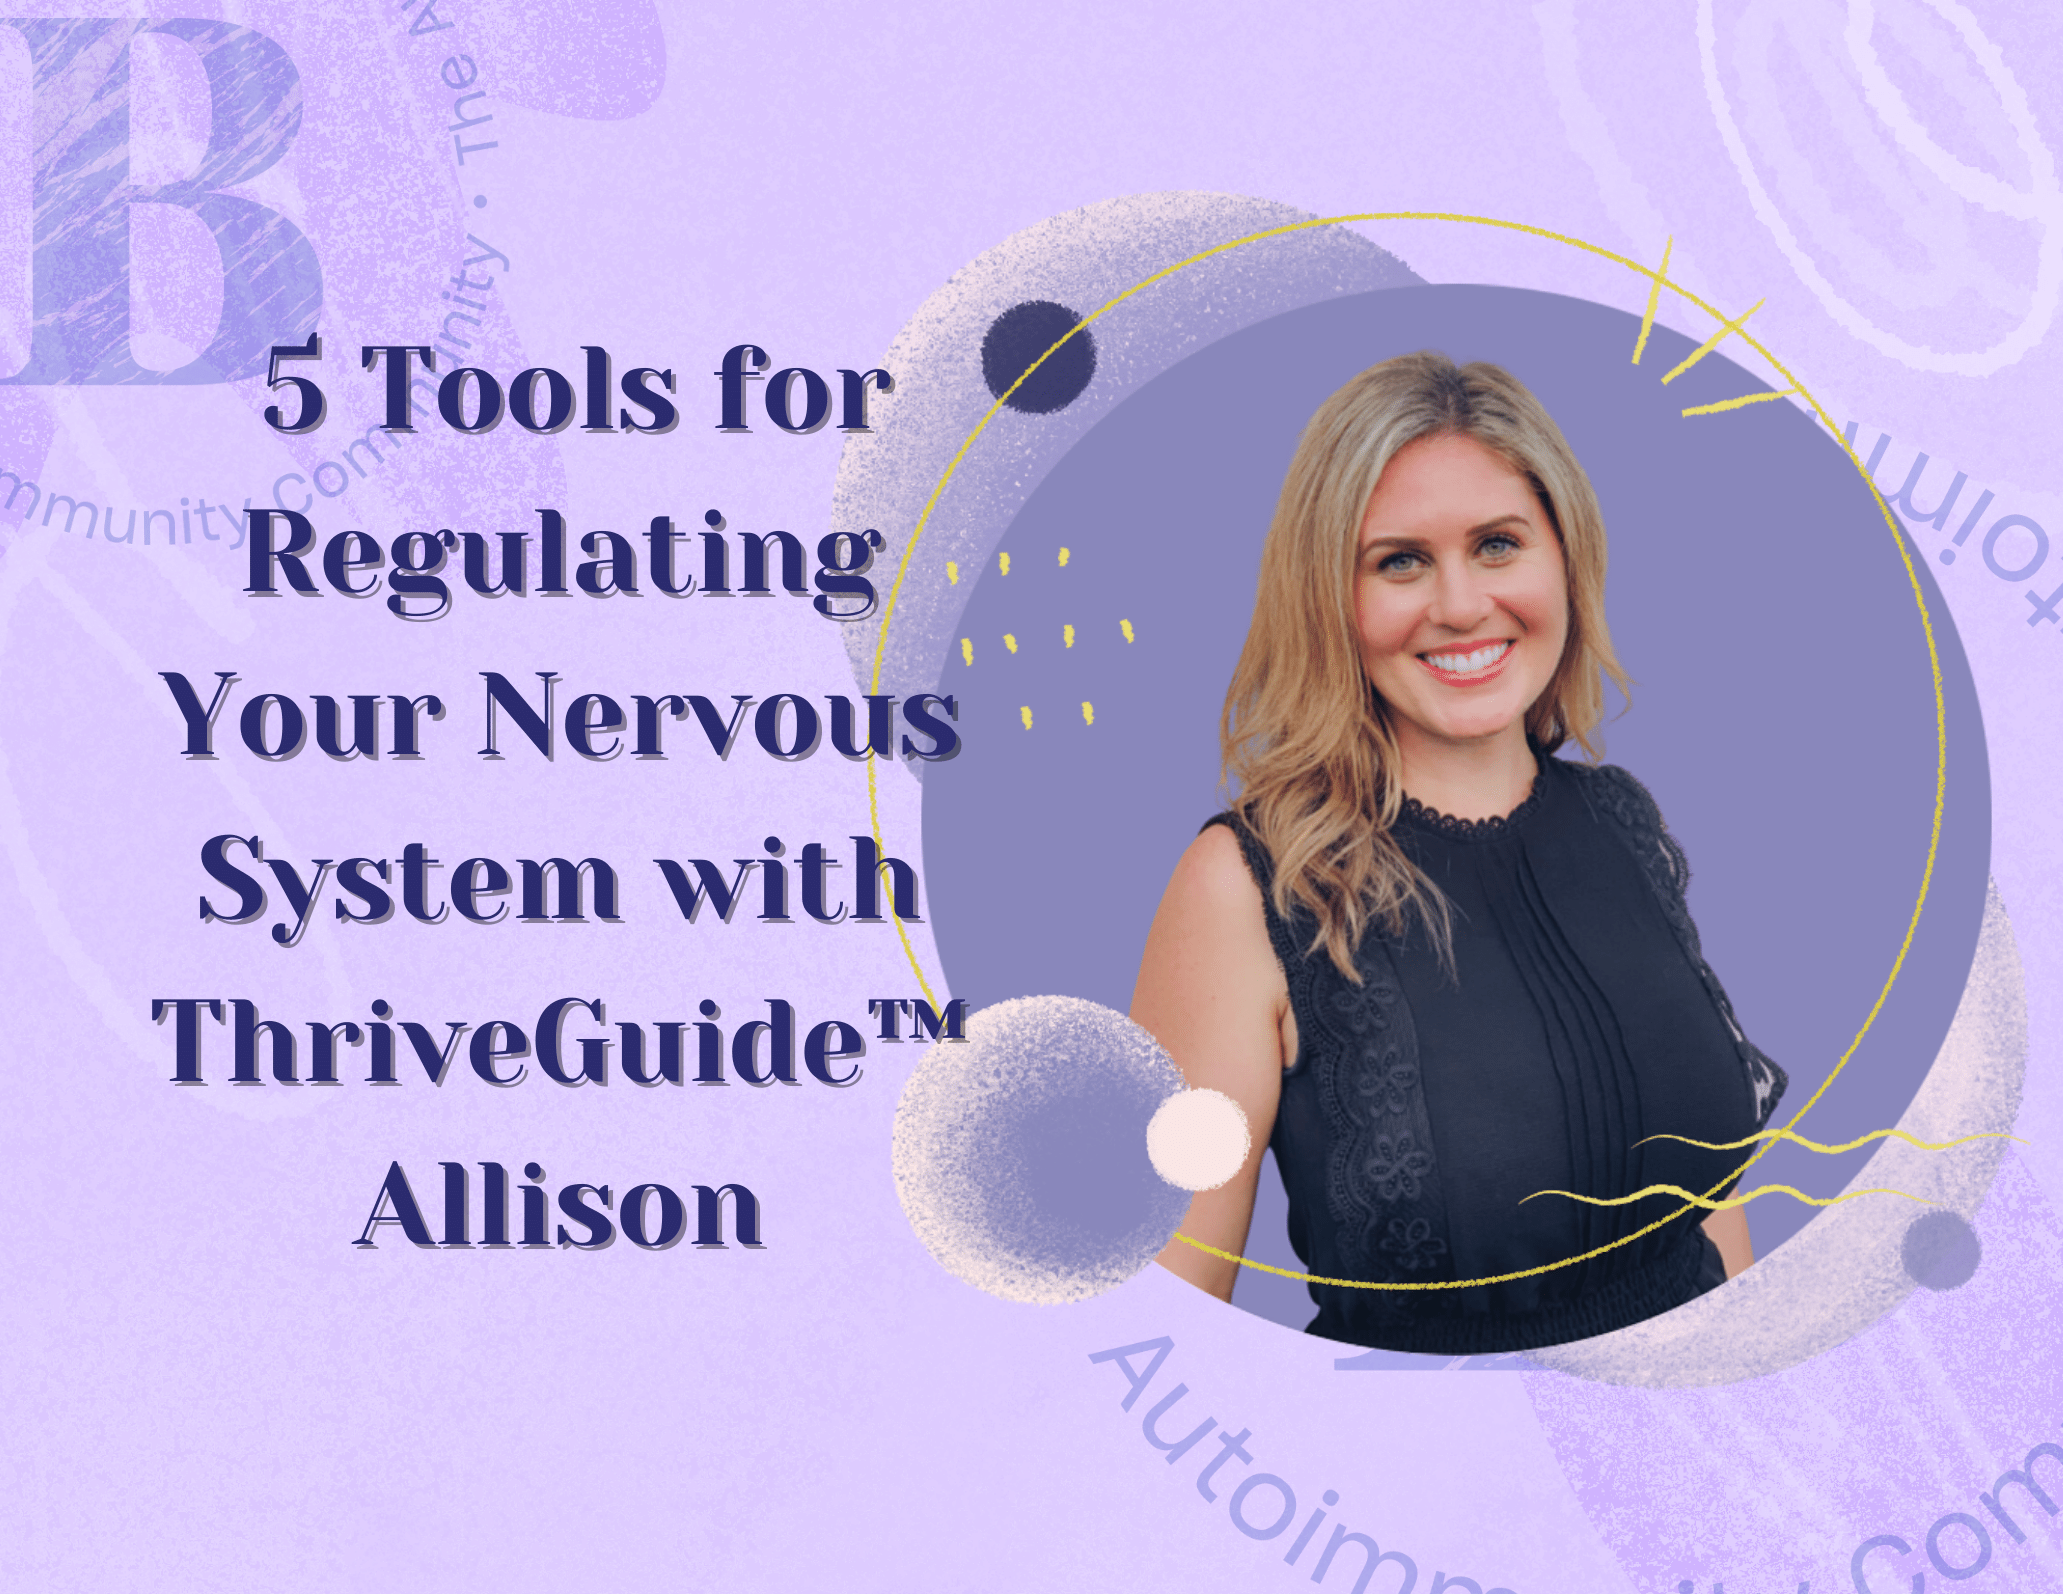 5 Tools to Regulate Your Nervous System with ThriveGuide Allison